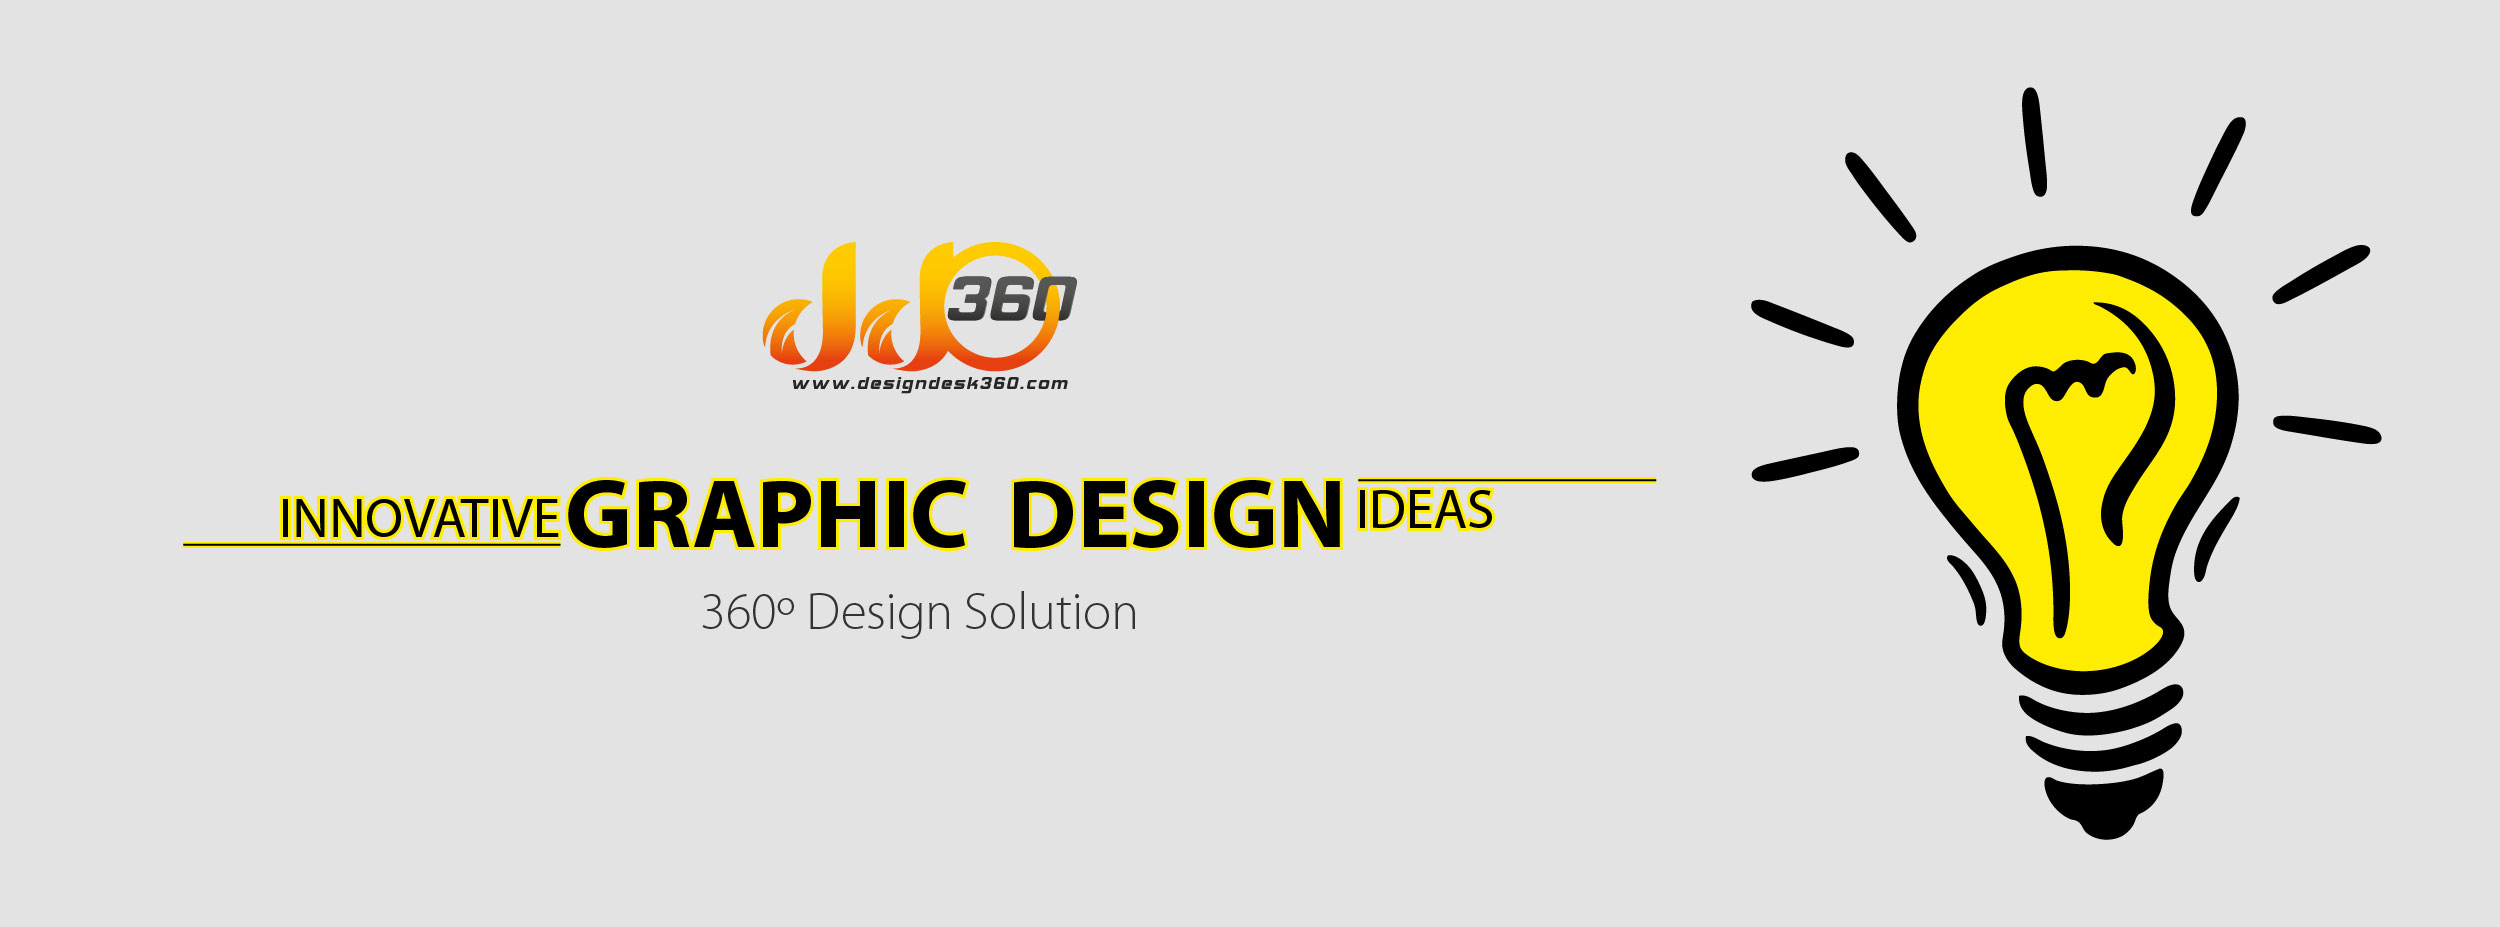 DESIGN DESK 360 IS GRAPHIC DESIGNING COMPANY IN LONDON